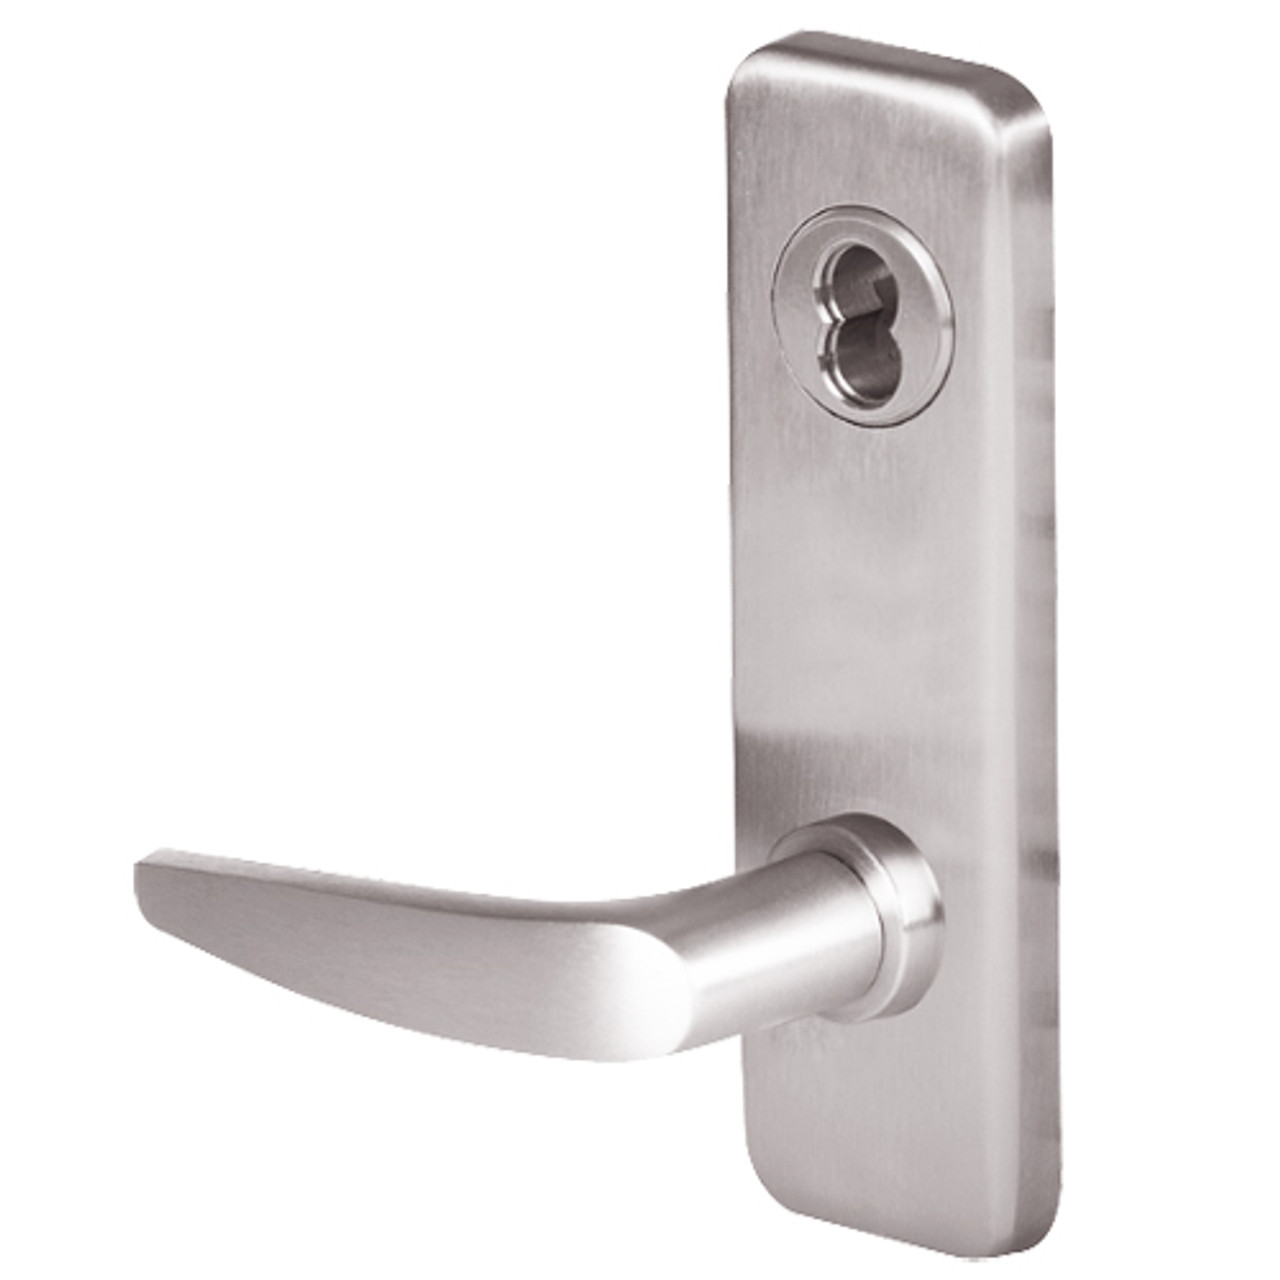 45HW7TWEL16J629RQE12V Best 40HW series Double Key Deadbolt Fail Safe Electromechanical Mortise Lever Lock with Curved w/ No Return Style in Bright Stainless Steel